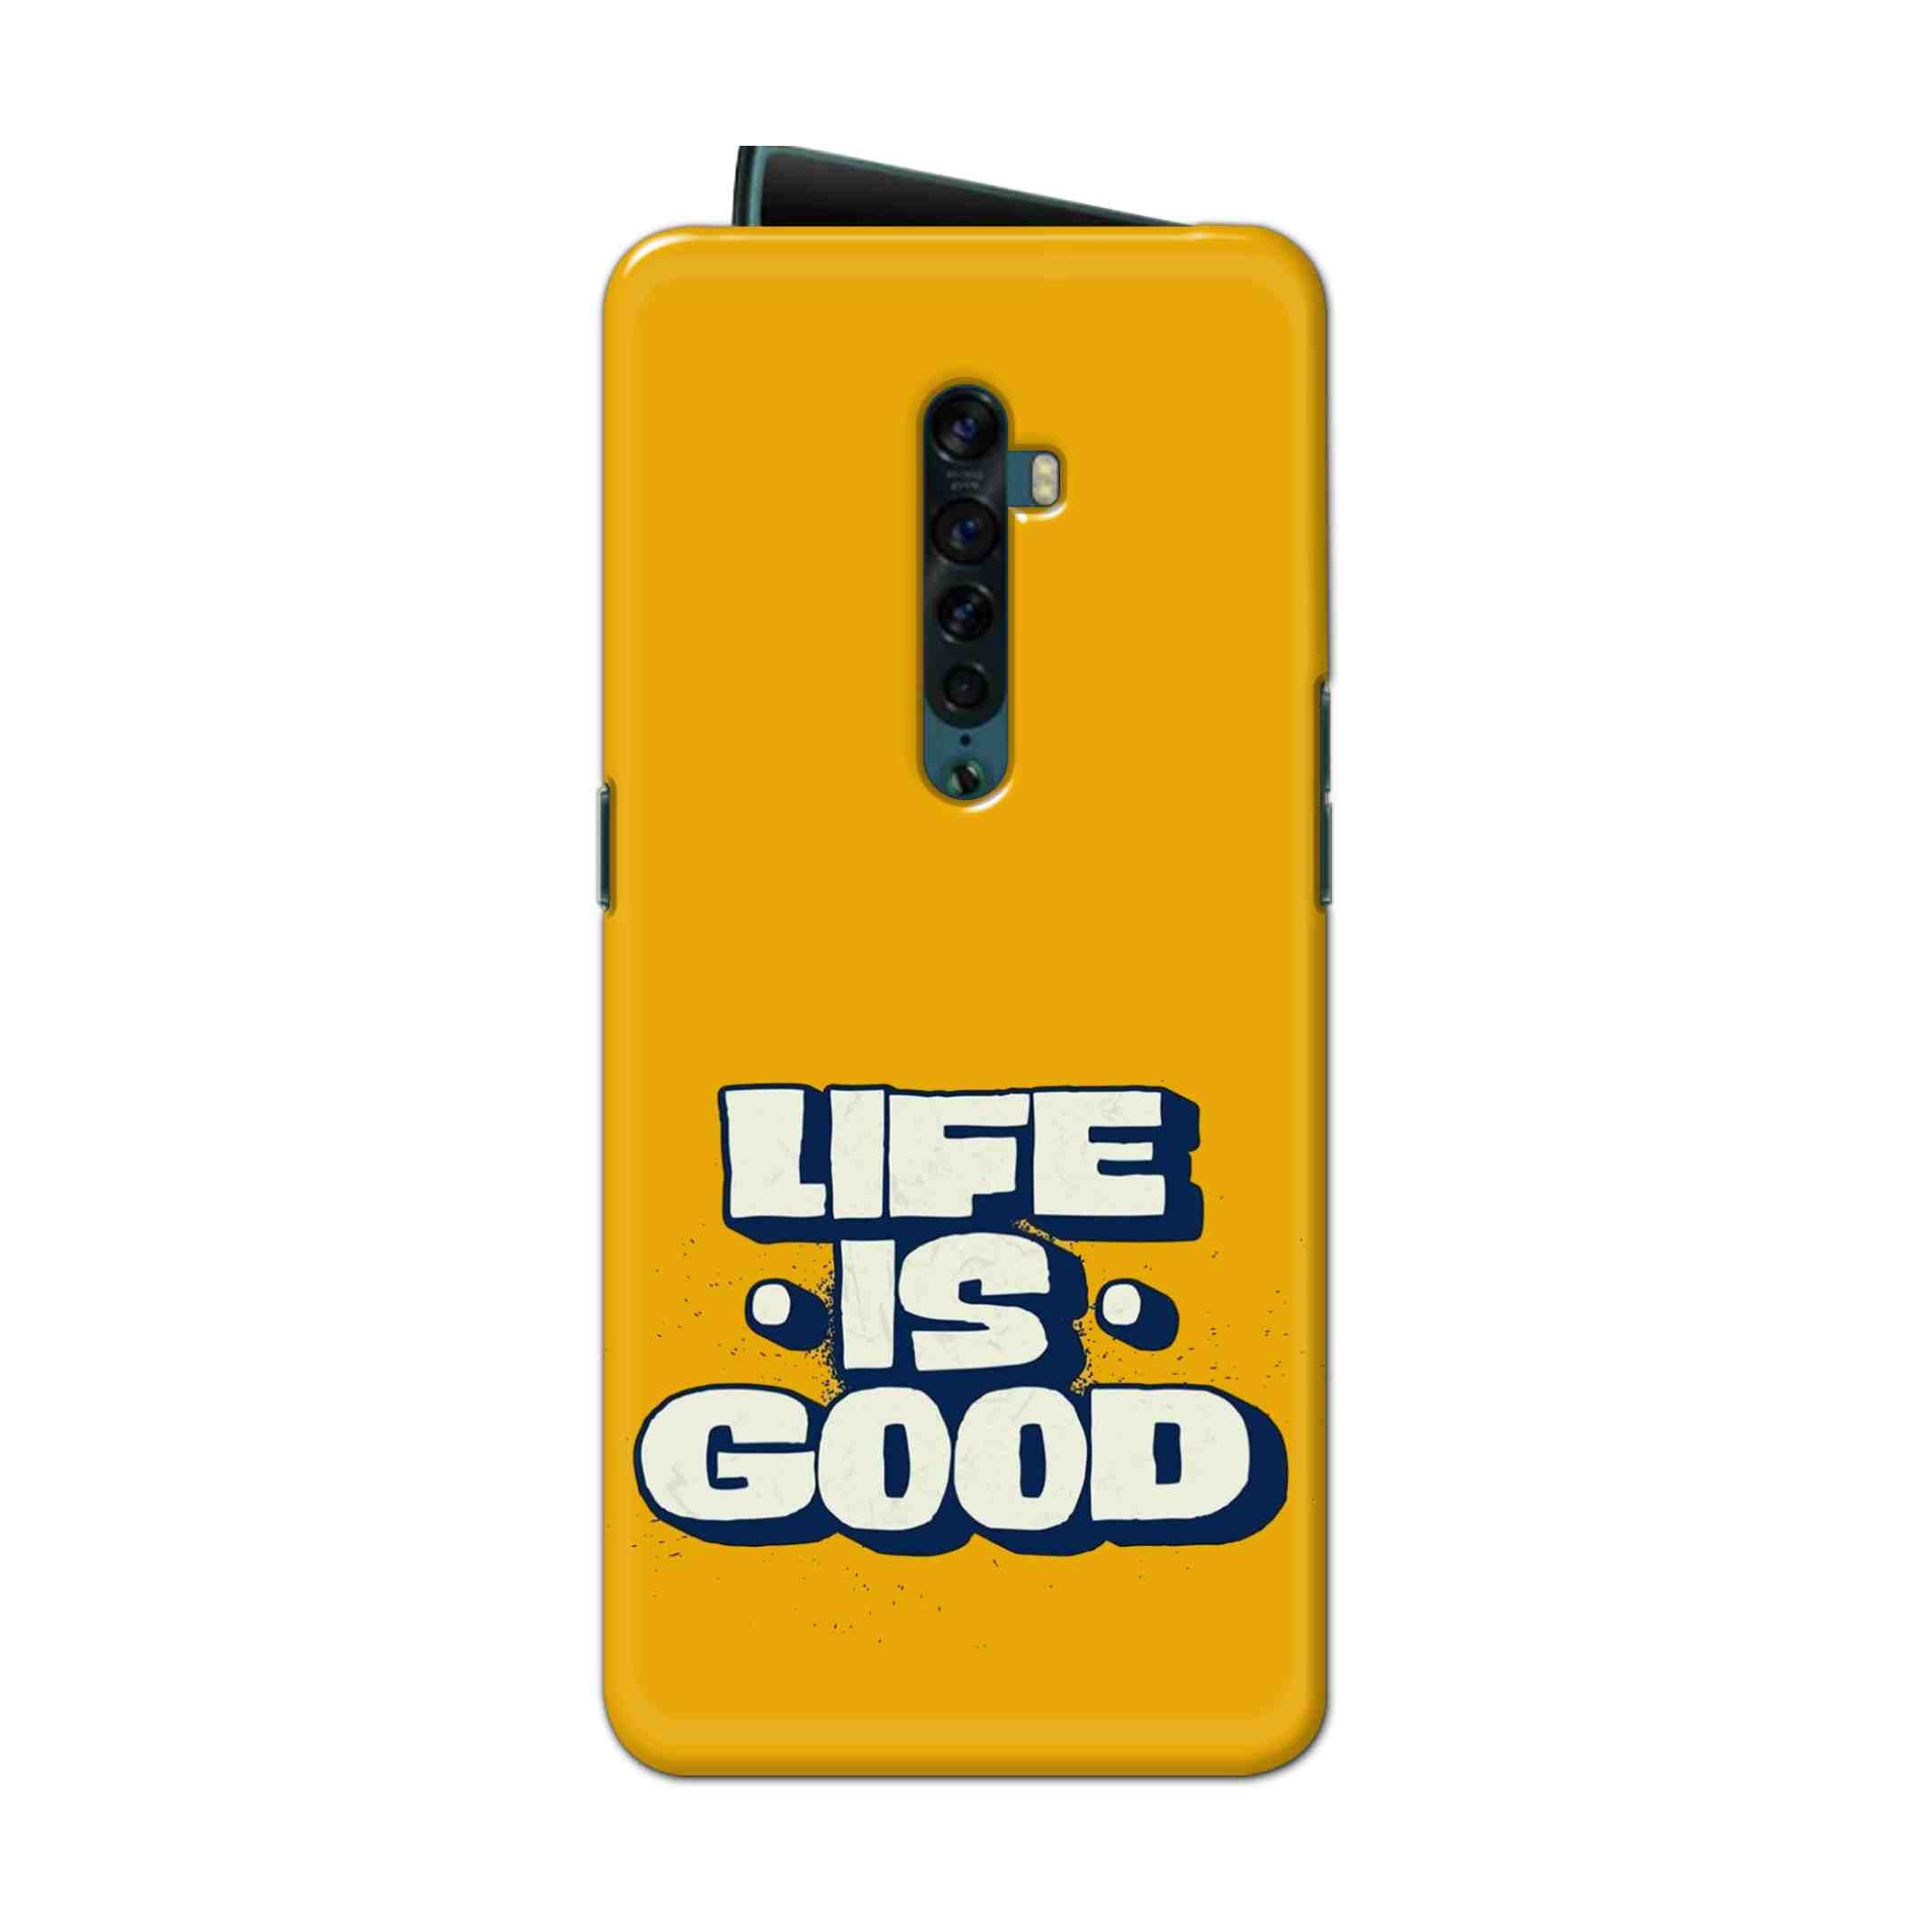 Buy Life Is Good Hard Back Mobile Phone Case Cover For Oppo Reno 2 Online